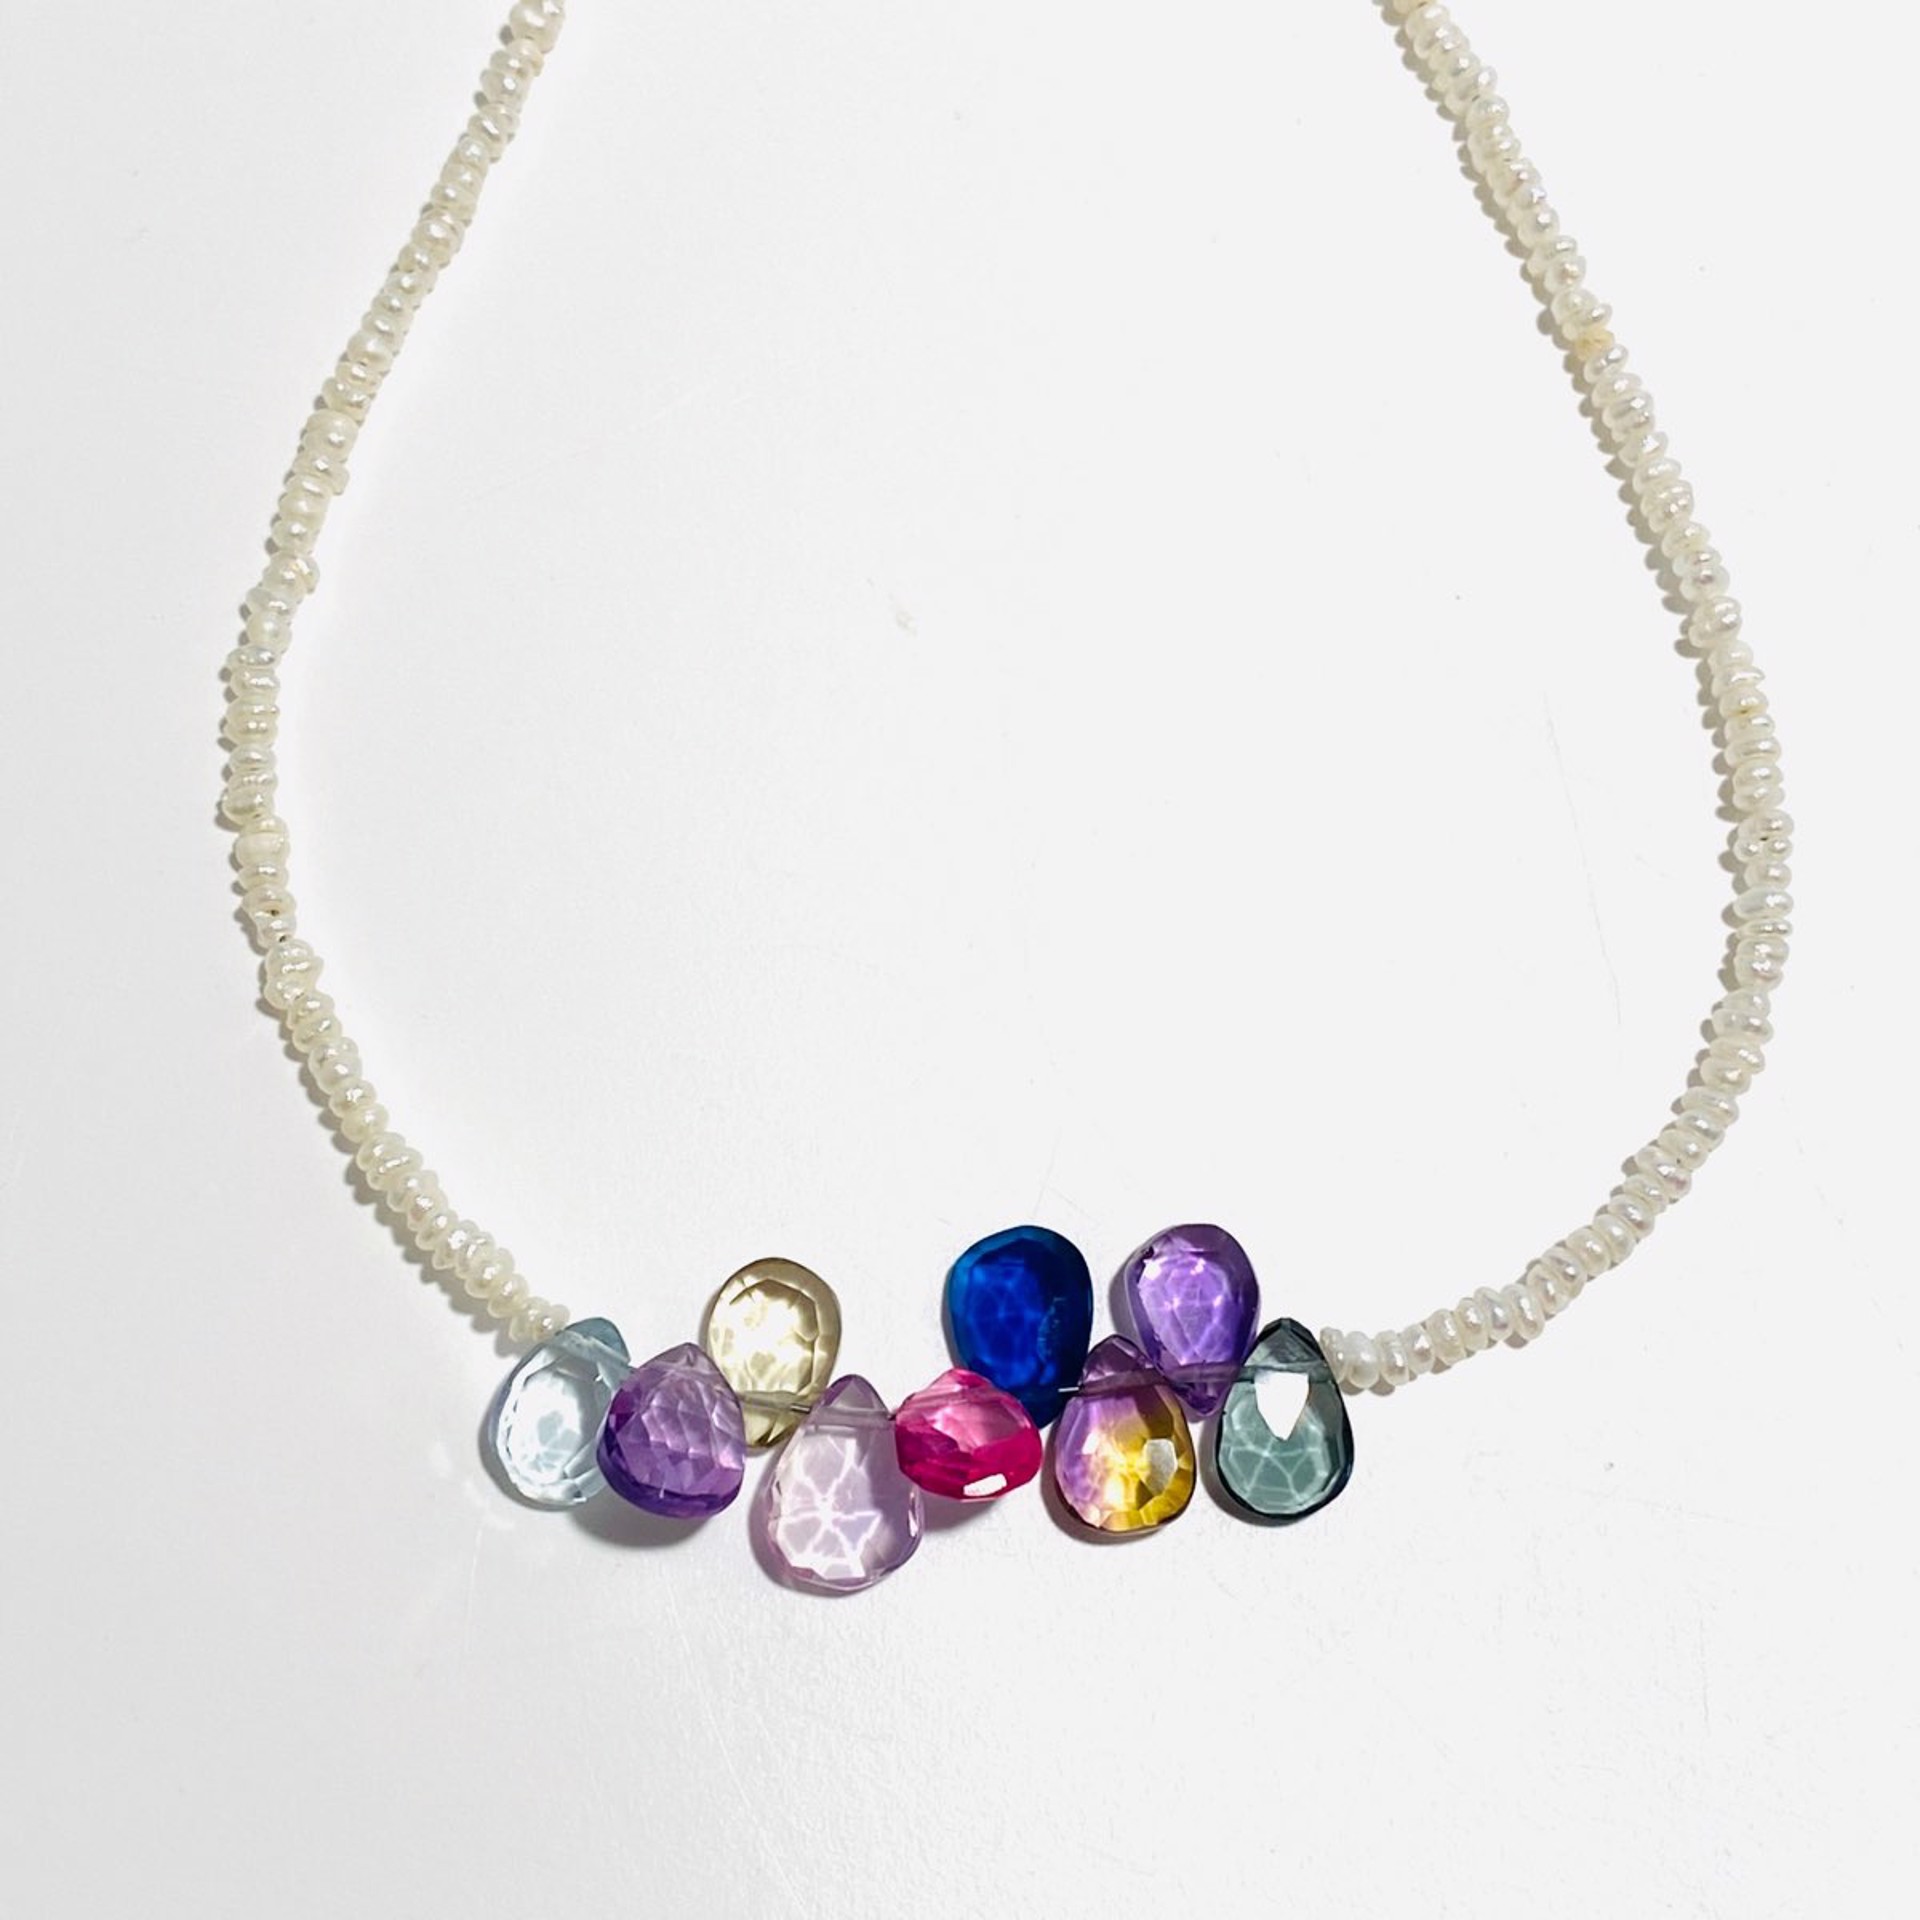 Tiny Seed Pearl Mixed Gemstone Brios Necklace by Nance Trueworthy